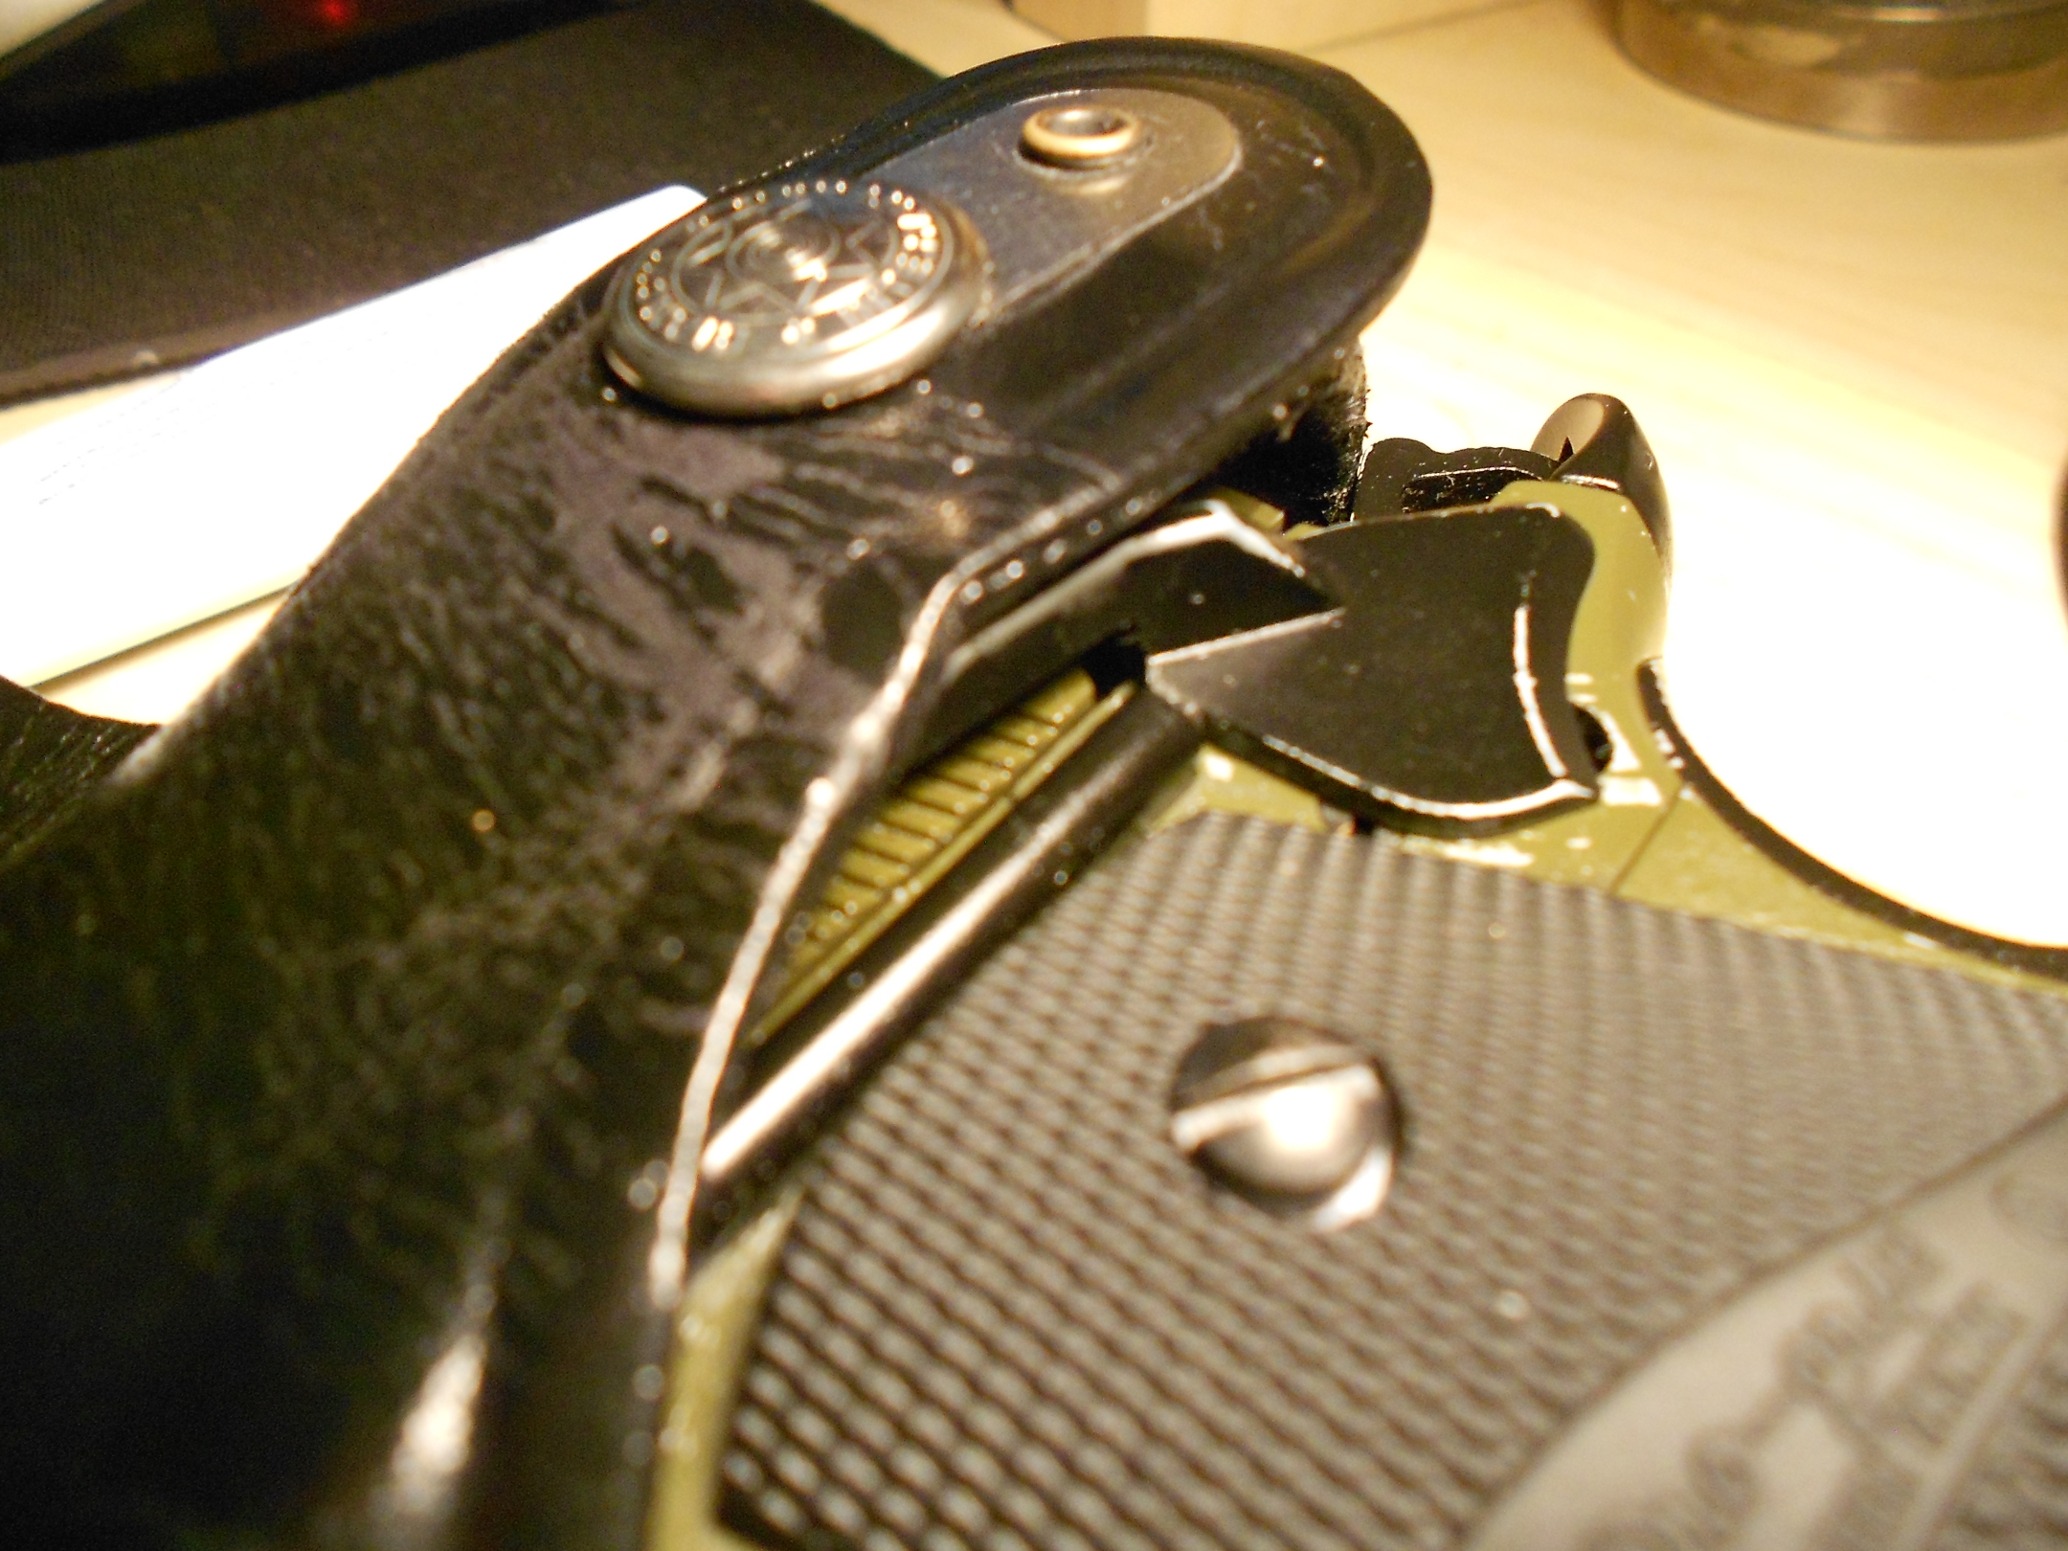 A close up of a 1911 pistol "cocked and locked" in a Bianchi Model 7 holster. As can be seen the top break strap sits against the safety catch tending to push it off. This seems to be an intentional design feature as the holster is designed for uncocked carry only.